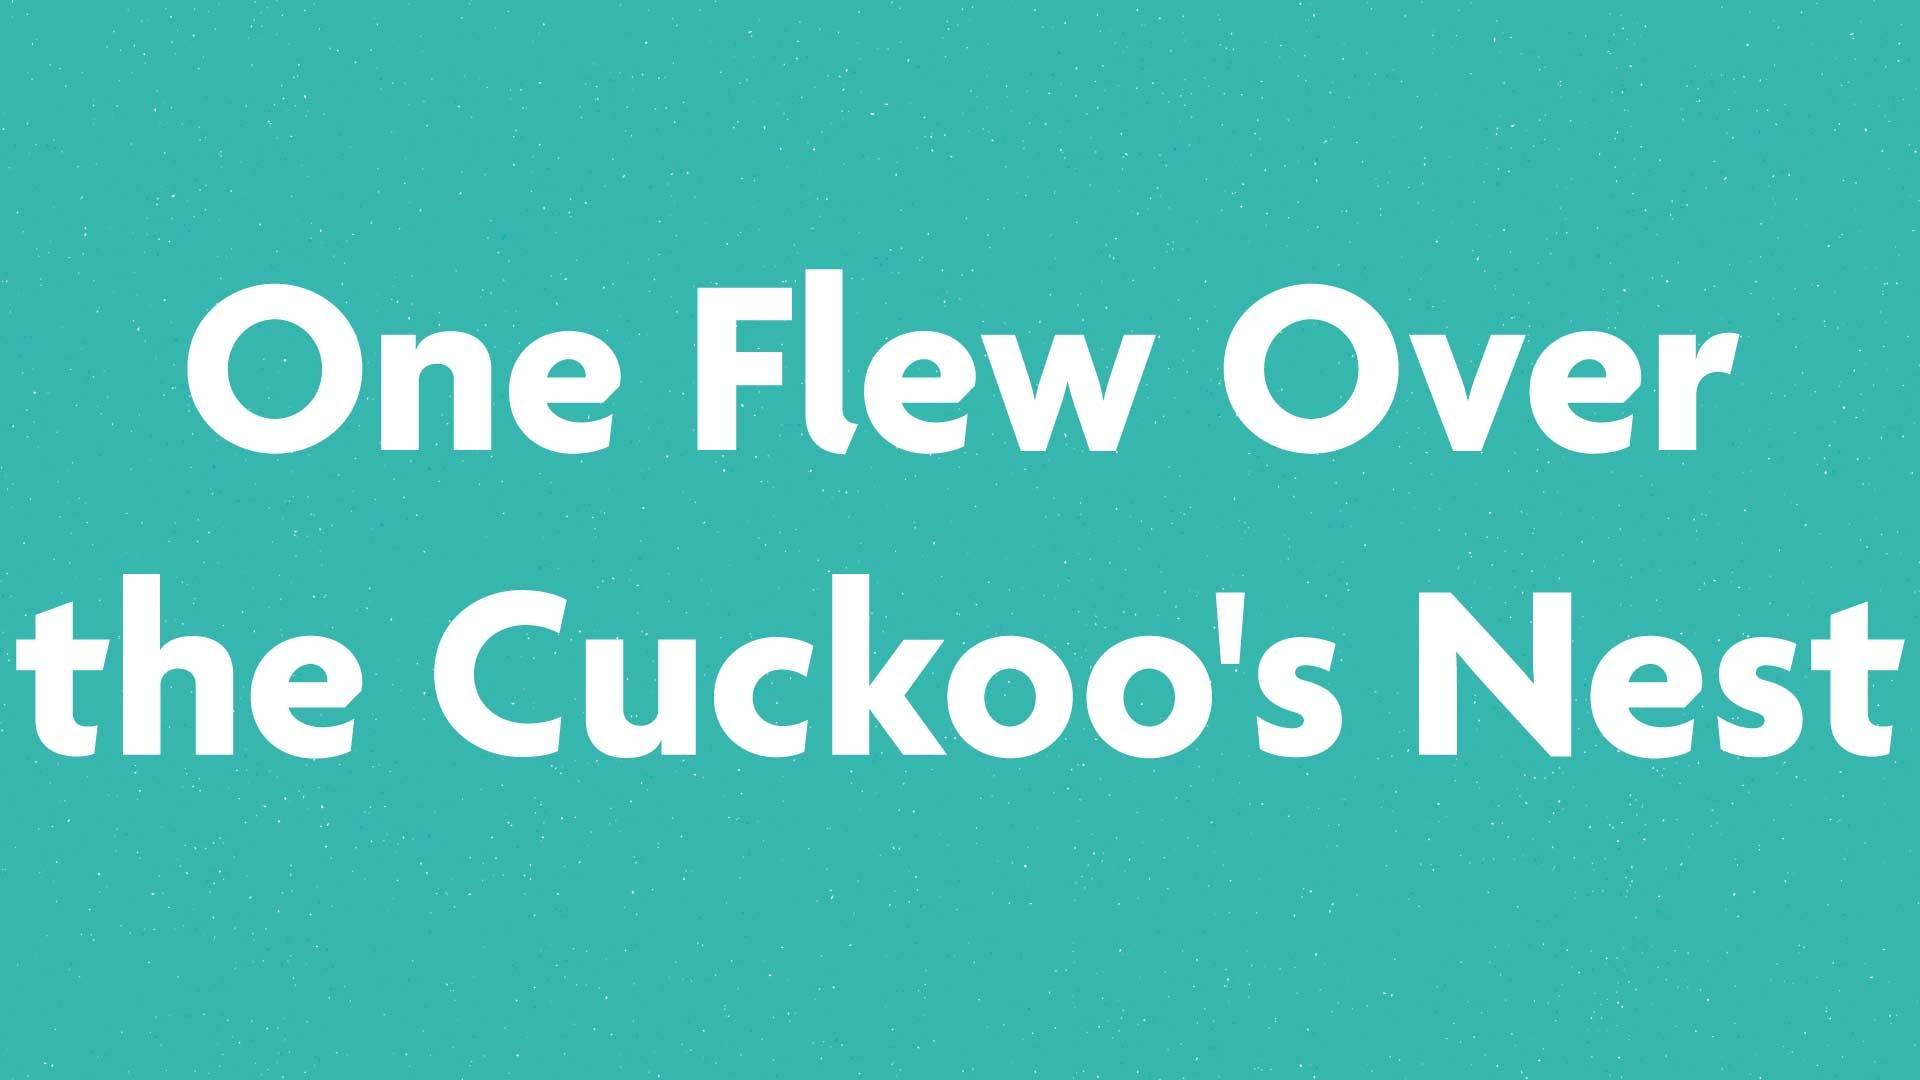 One Flew Over the Cuckoo's Nest book submission card on a green background.